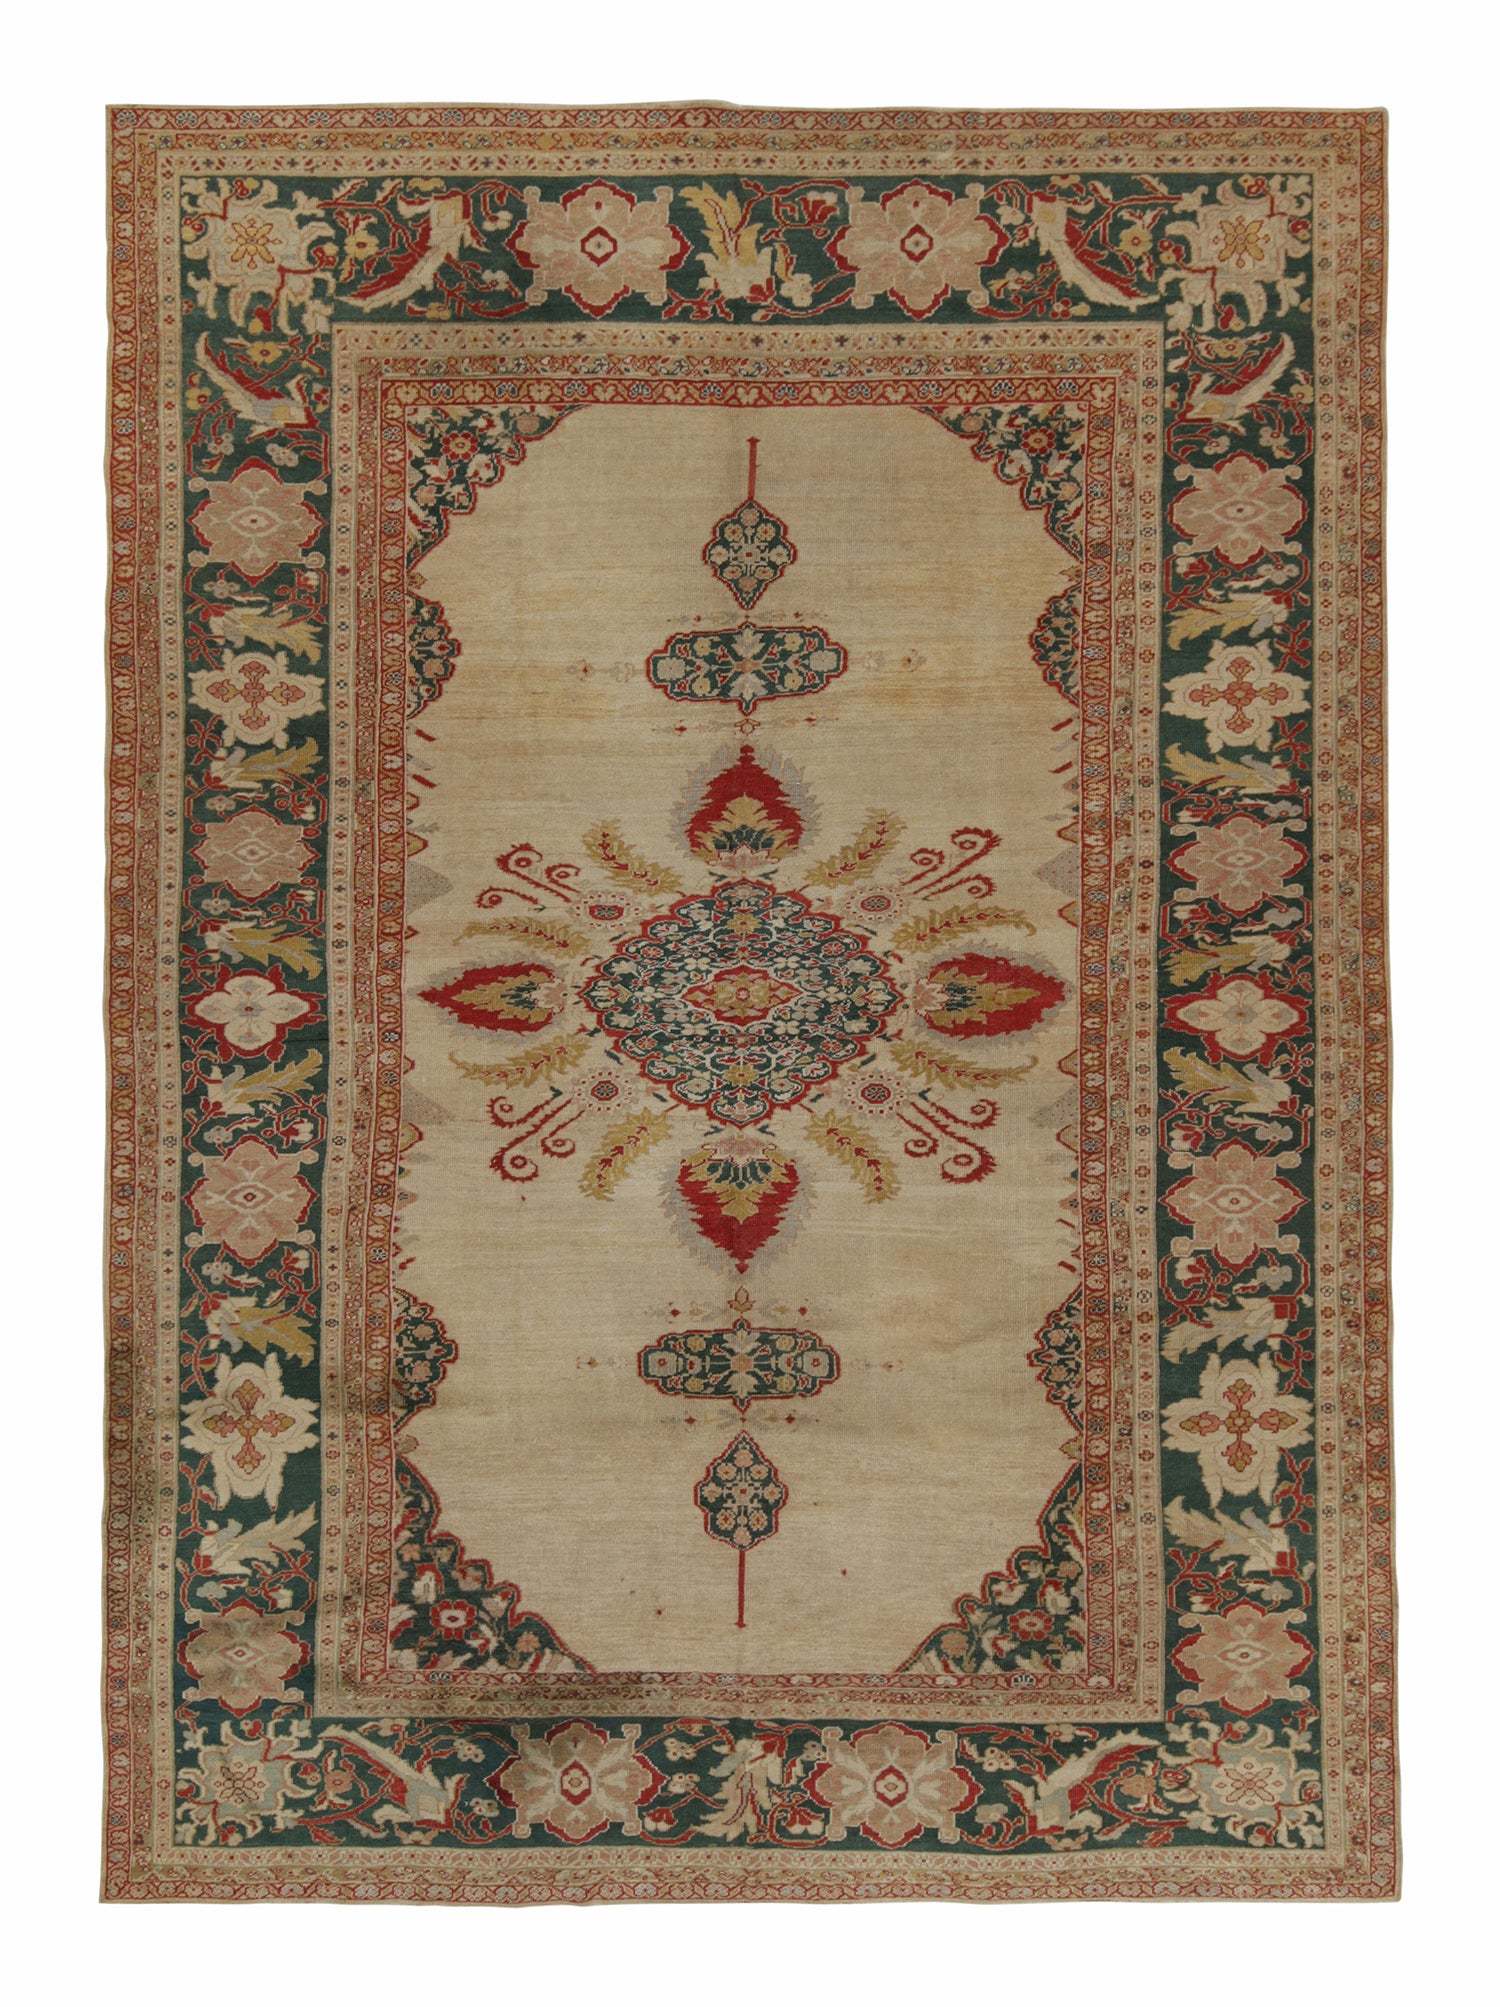 Antique Persian Sultanabad rug in Beige Floral Medallion Style, by Rug & Kilim